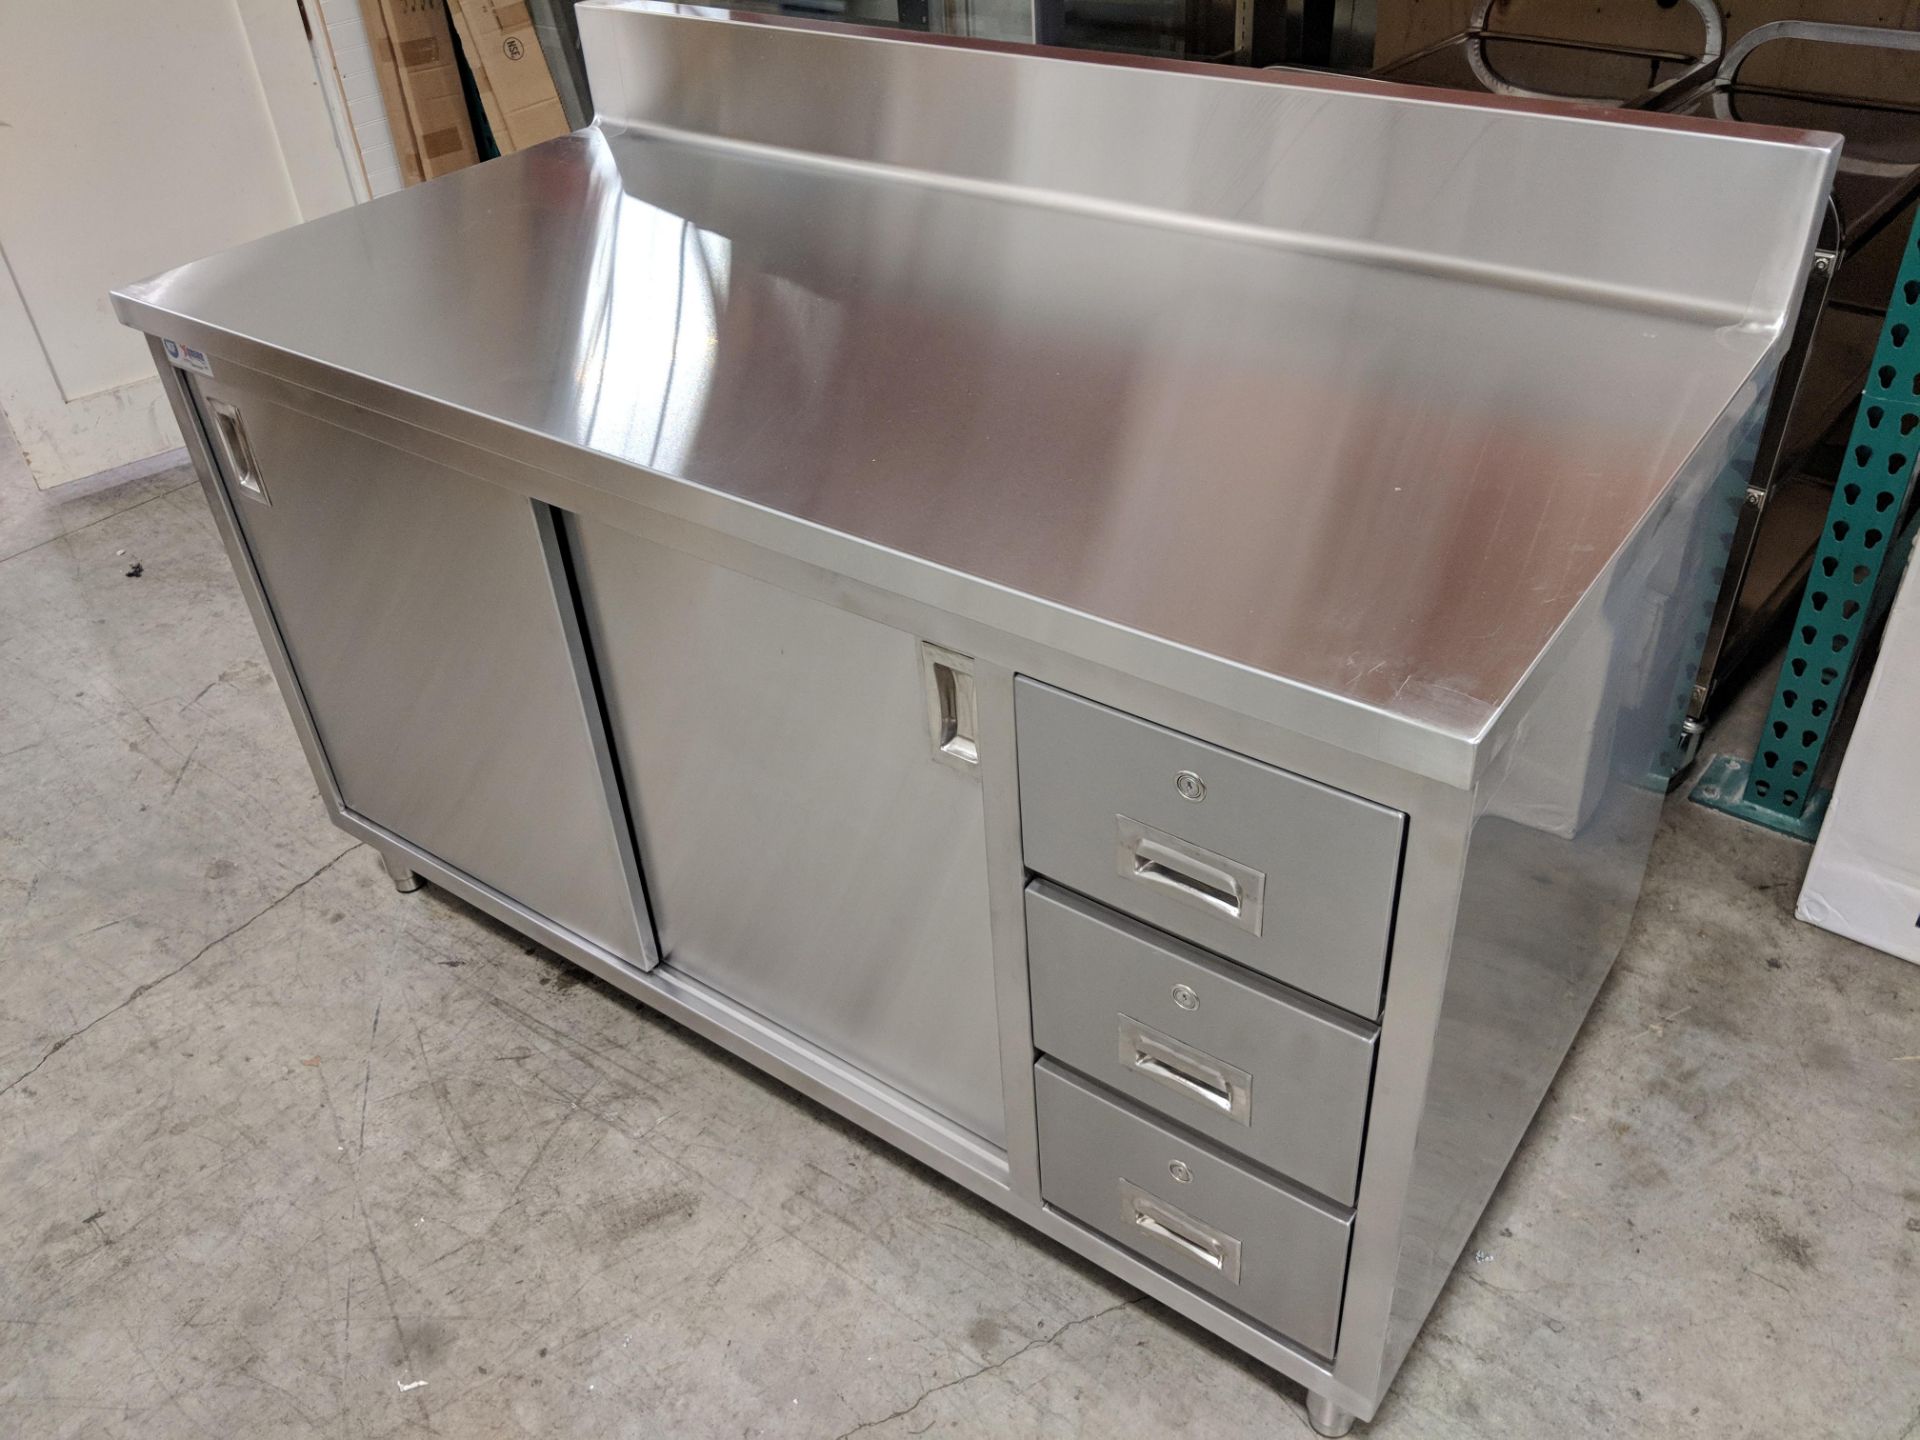 30" x 60" Stainless Work Table with Cabinet and Drawers